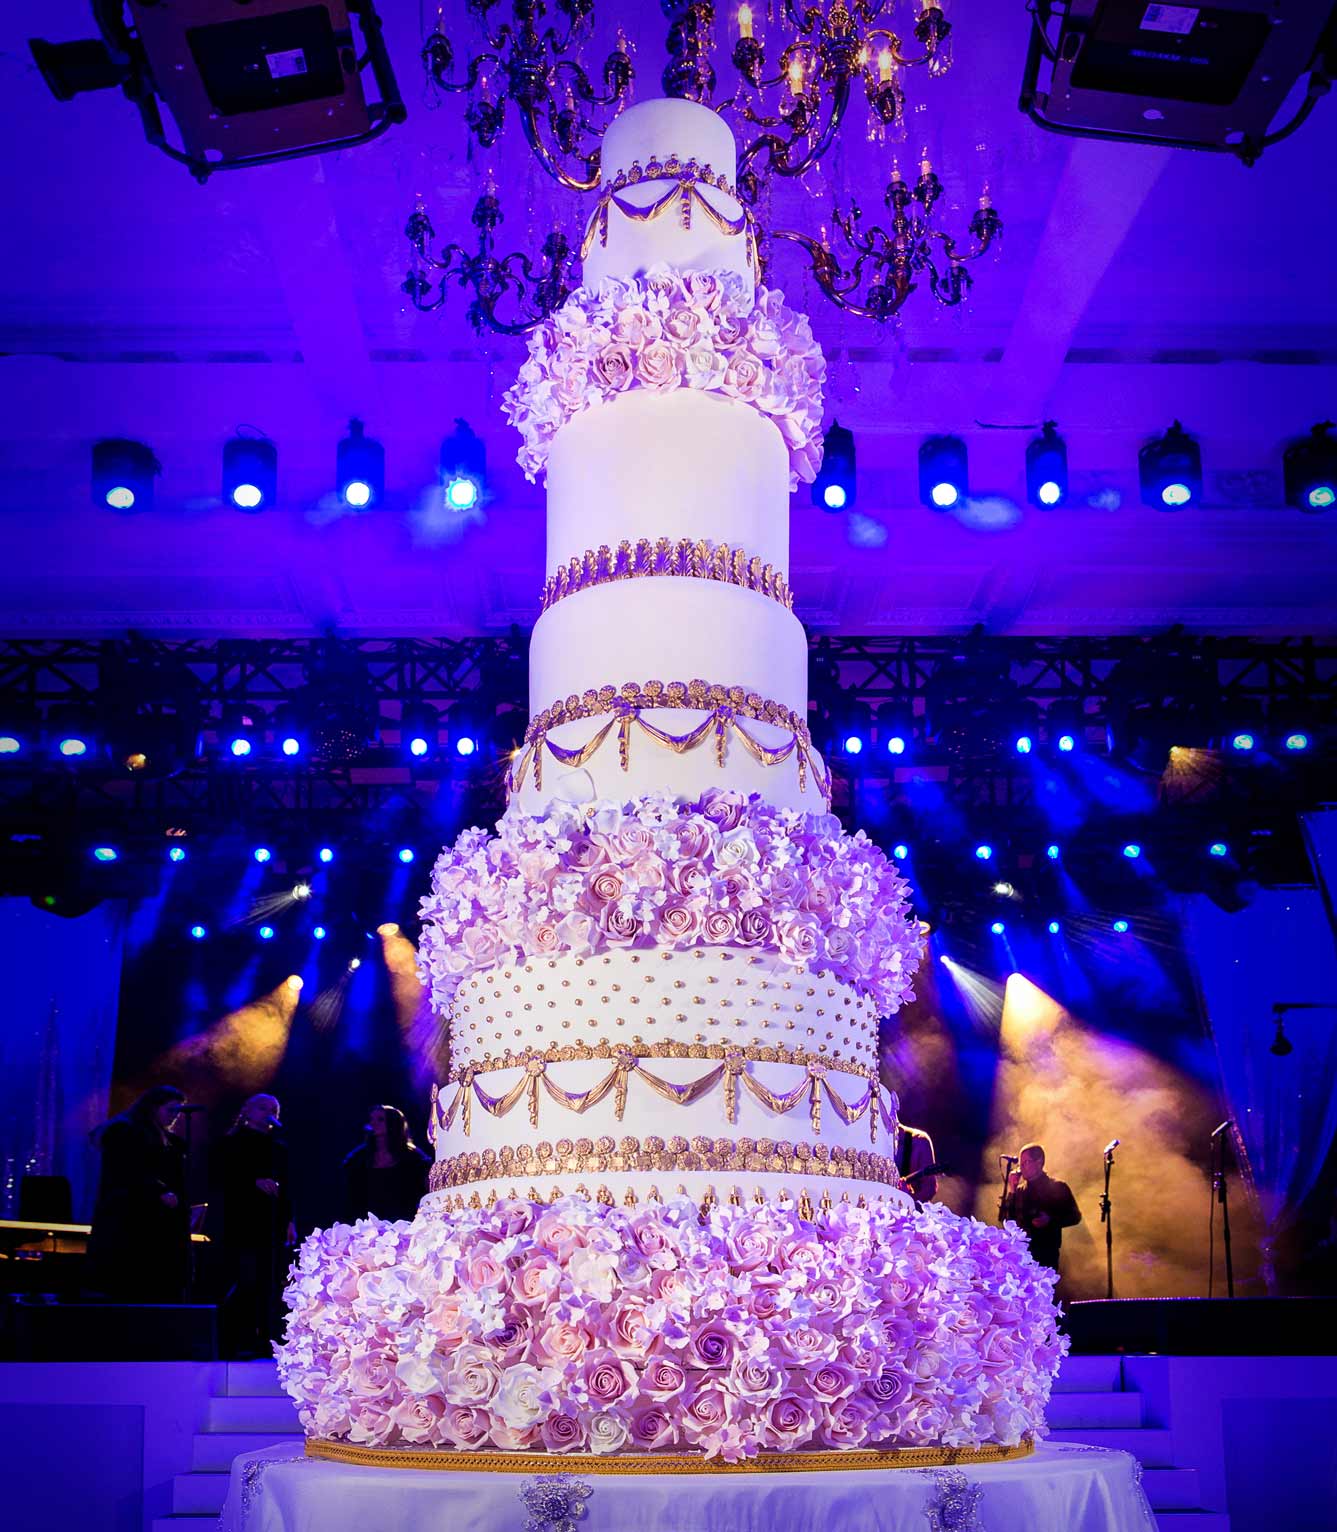 ron puryears river house wedding cake ~ the biggest cake I… | Flickr